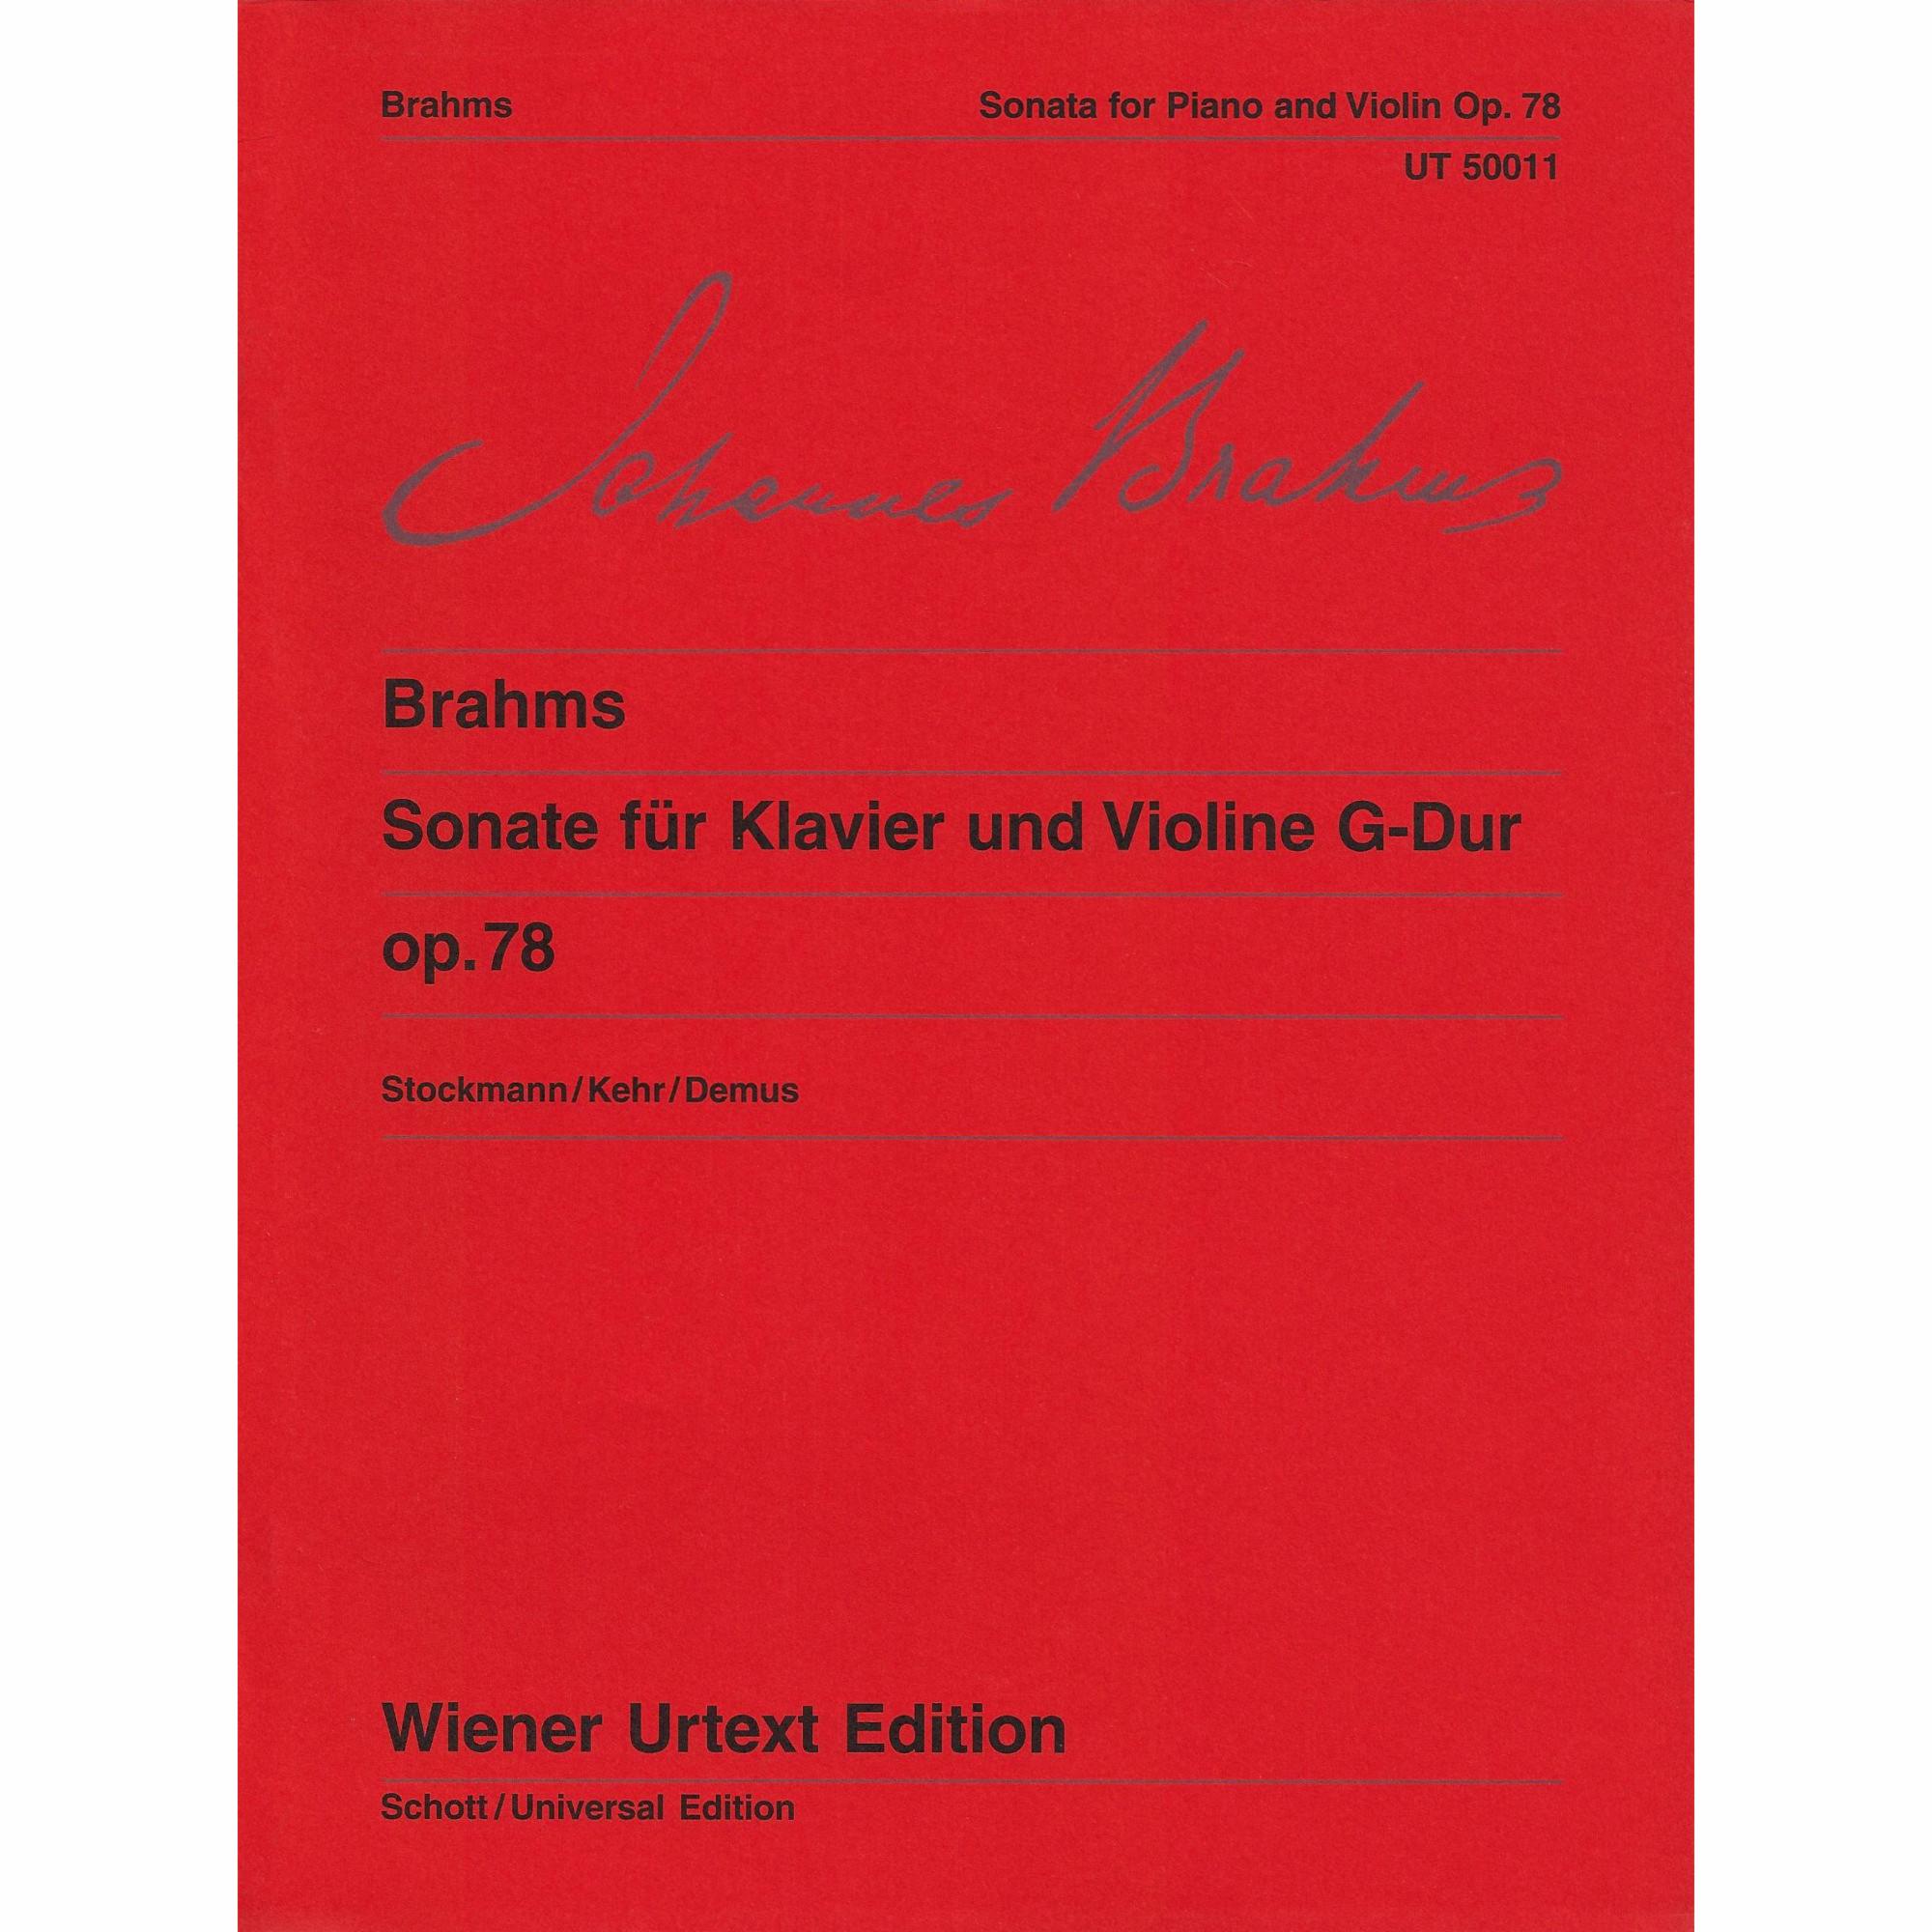 Brahms -- Sonata in G Major, Op. 78 for Violin and Piano